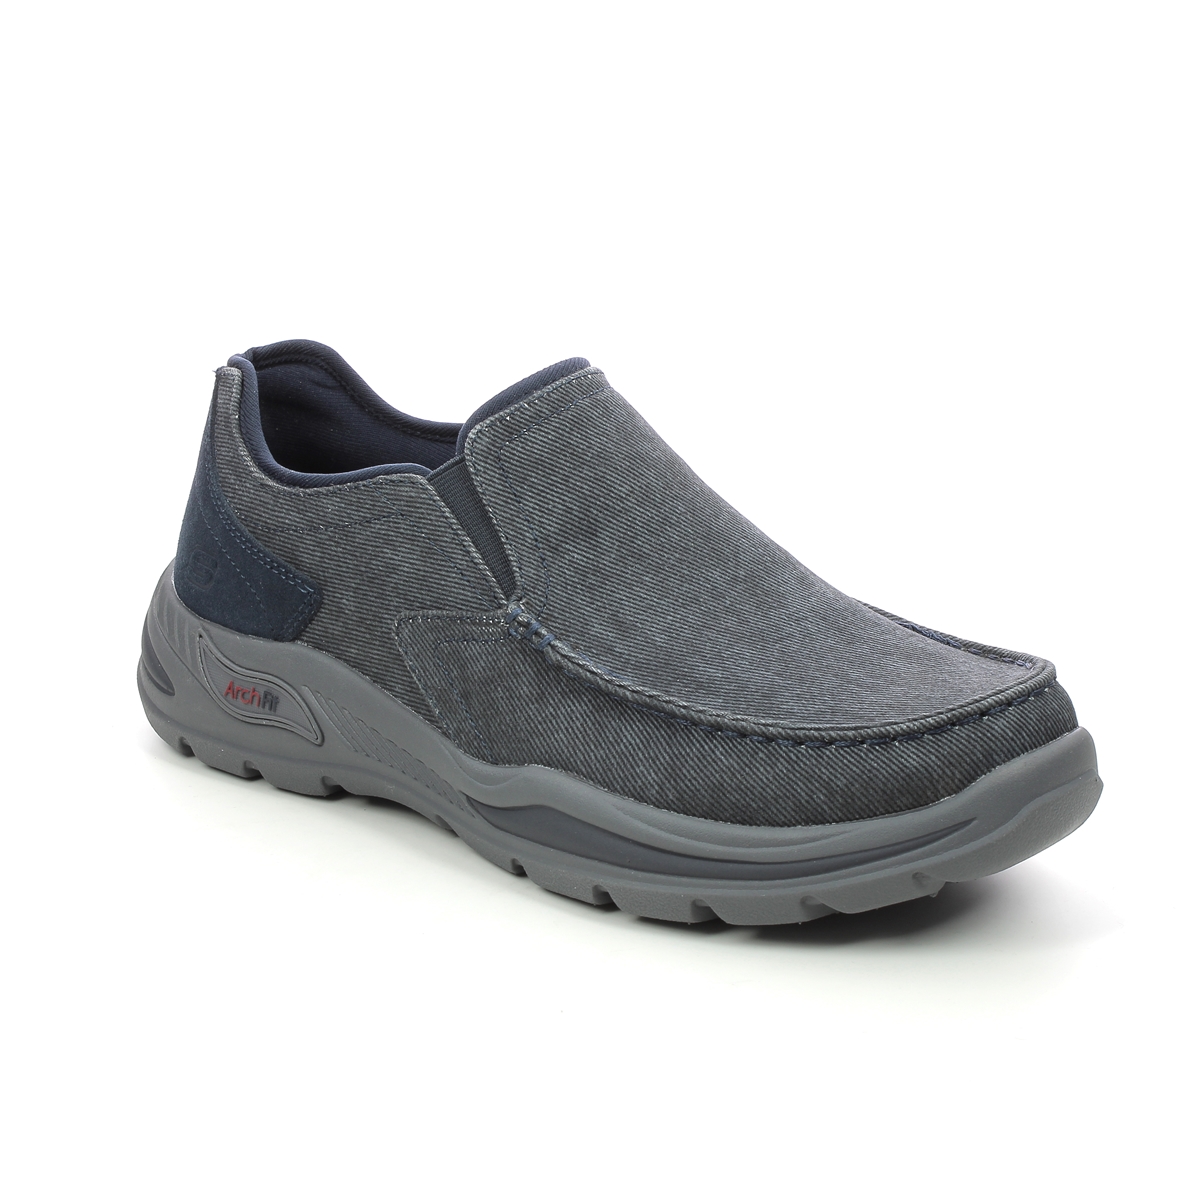 Skechers Arch Fit Motley NVY Navy Mens Slip-on Shoes 204178